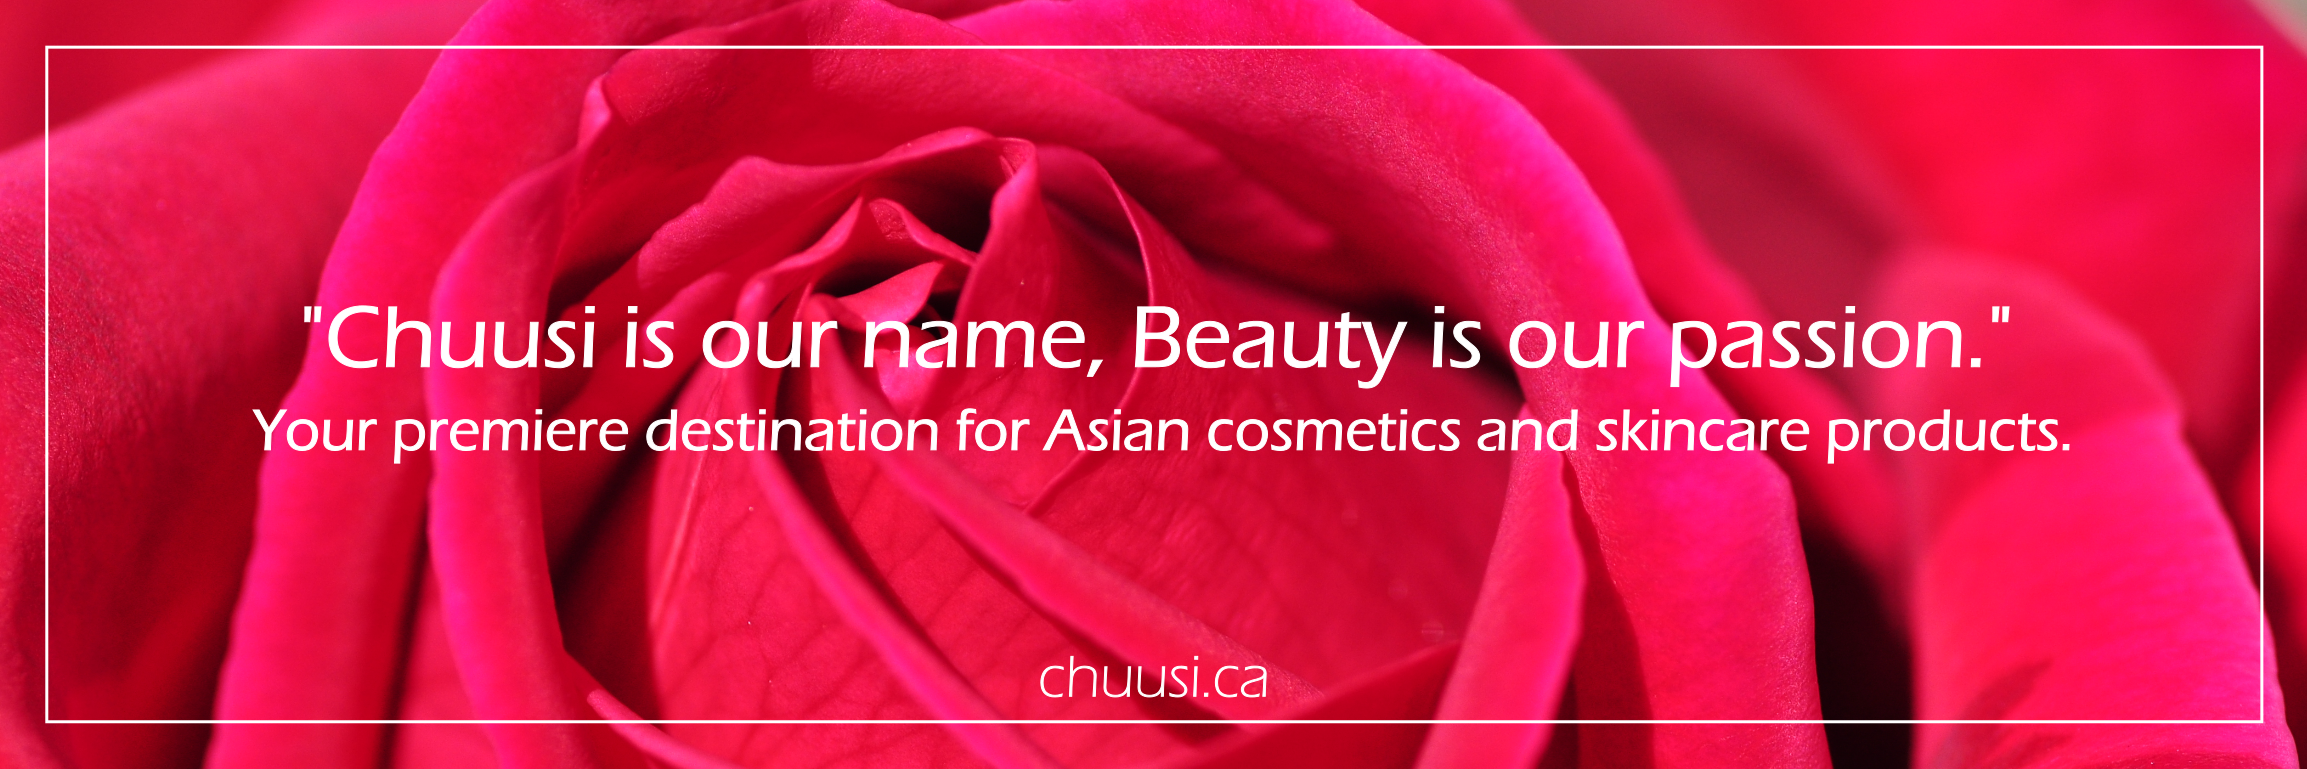 Chuusi is our name, Beauty is our passion